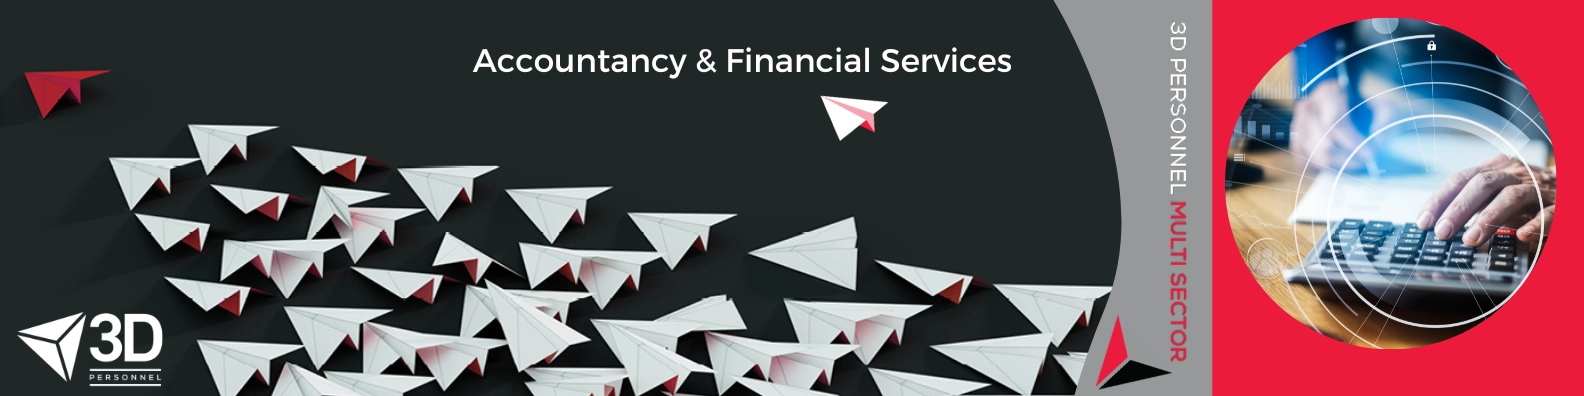 Accountancy, Financial Services & Banking graphic